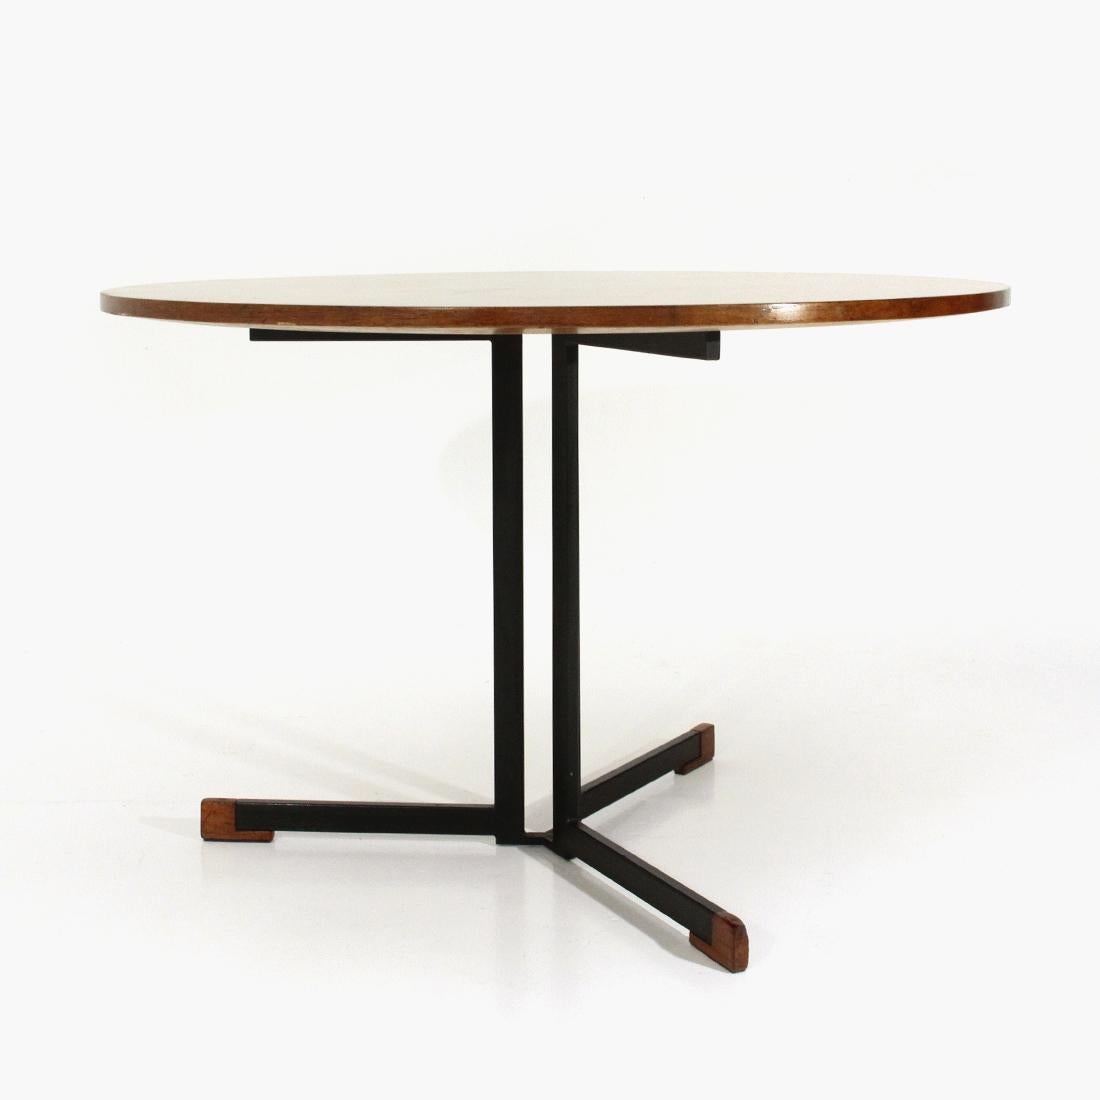 Italian-made table produced in the 1950s.
Central leg in black painted metal with wooden terminals.
Round top in veneered wood with tapered lower edges.
Fair general conditions, signs and lacks of veneer due to normal use over